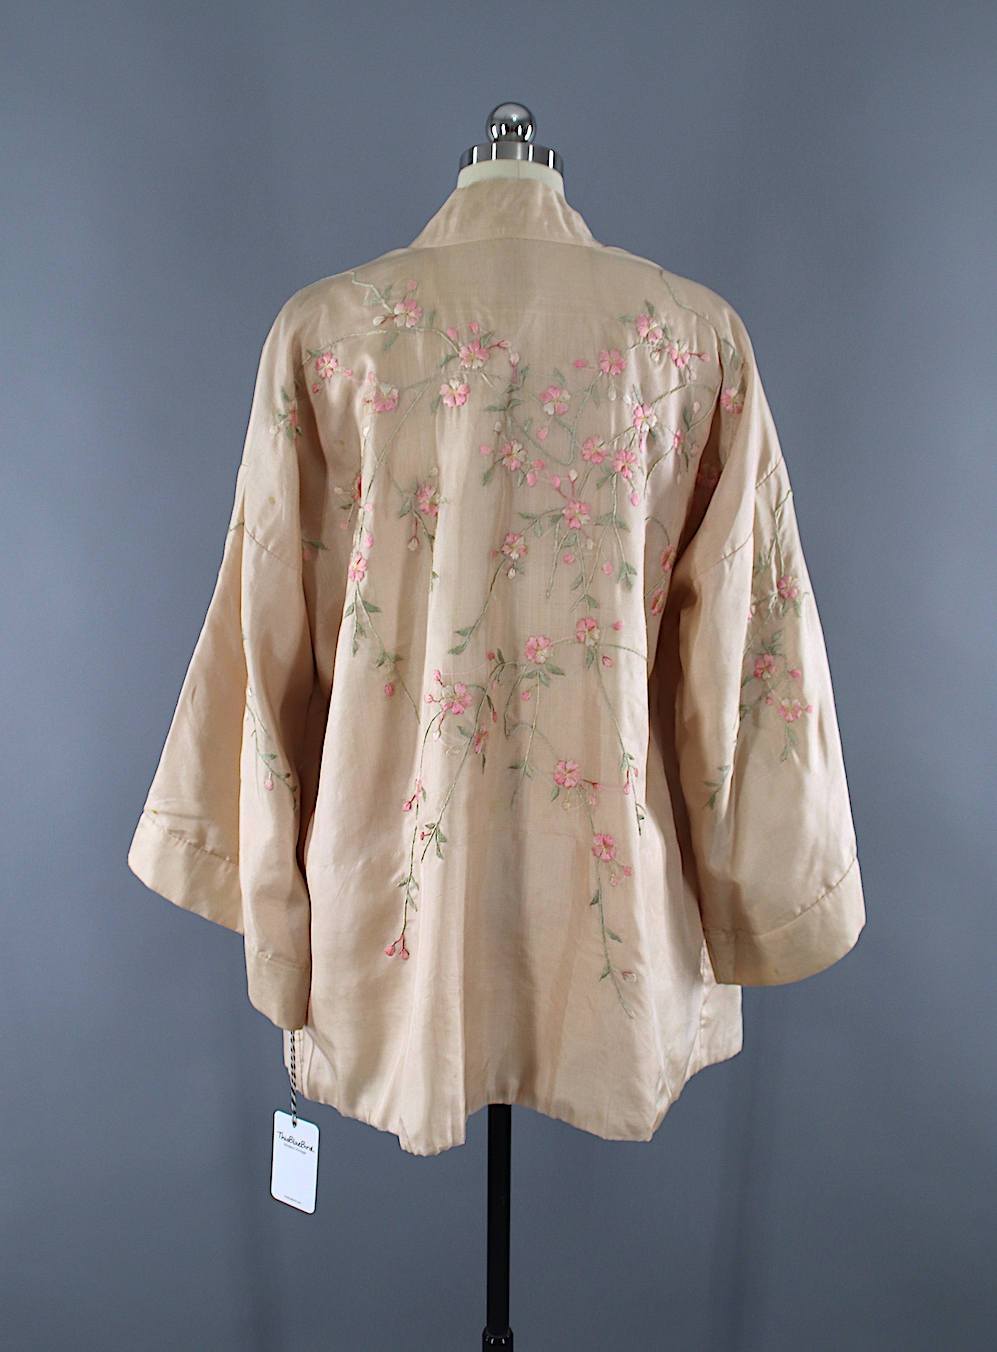 Vintage 1920s Embroidered Silk Kimono Jacket Cardigan / Blush Pink Floral Embroidery - ThisBlueBird